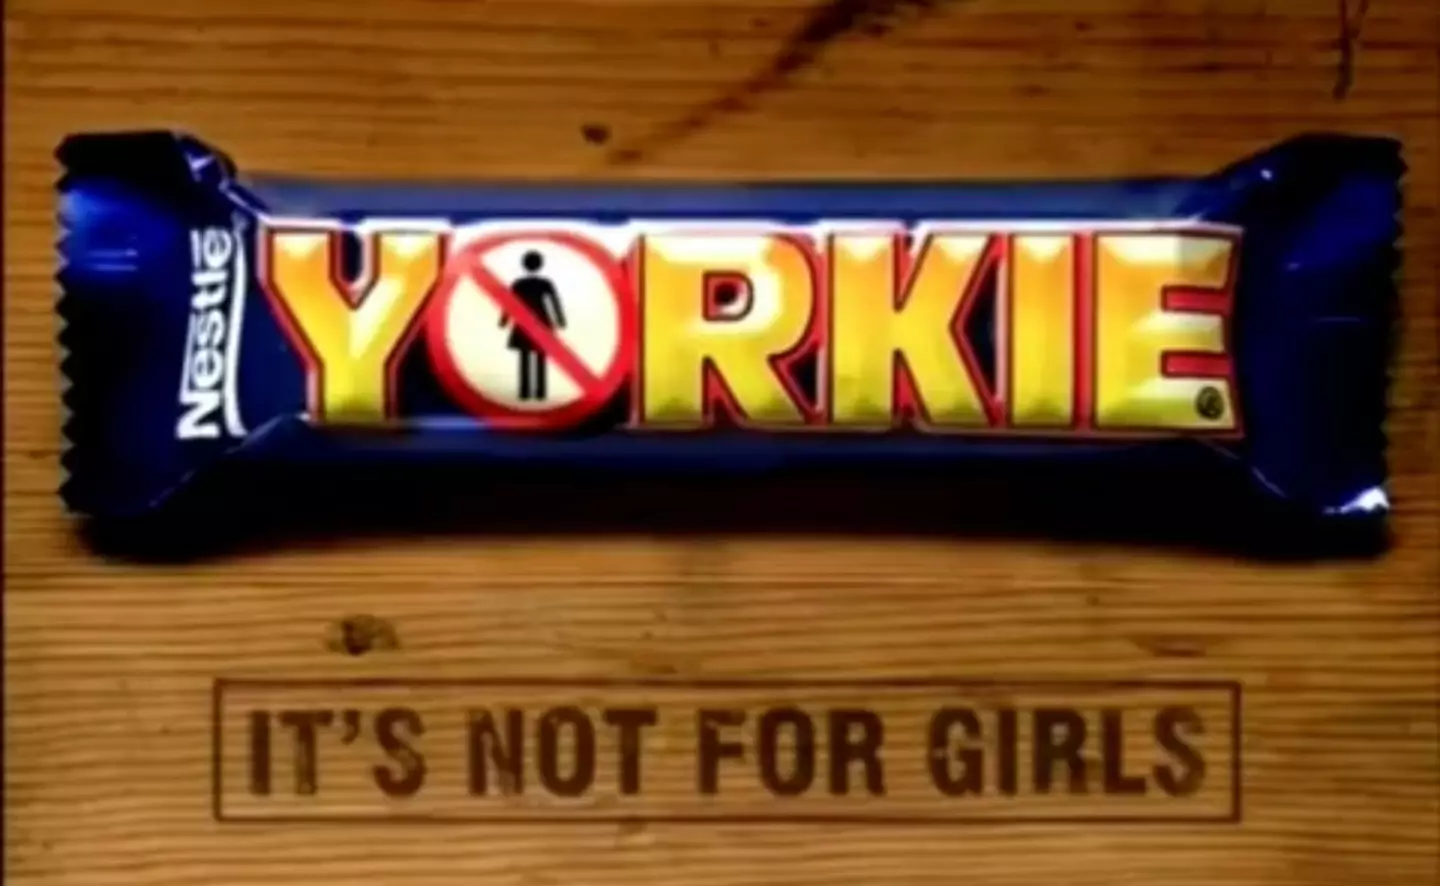 The slogan claimed the chocolate wasn't for girls.